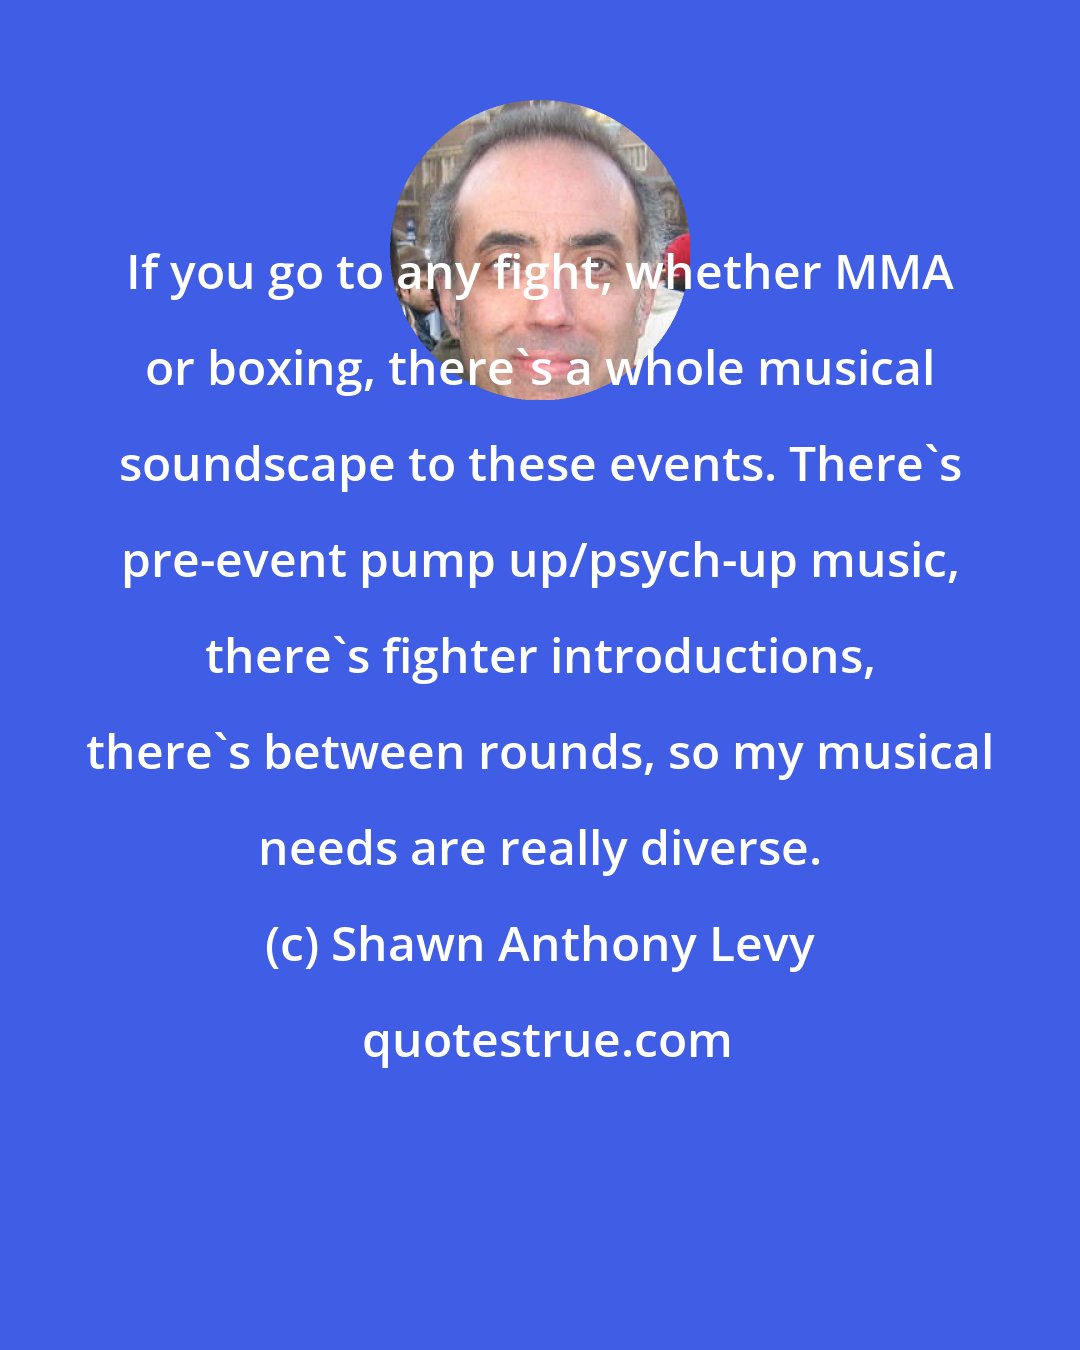 Shawn Anthony Levy: If you go to any fight, whether MMA or boxing, there's a whole musical soundscape to these events. There's pre-event pump up/psych-up music, there's fighter introductions, there's between rounds, so my musical needs are really diverse.